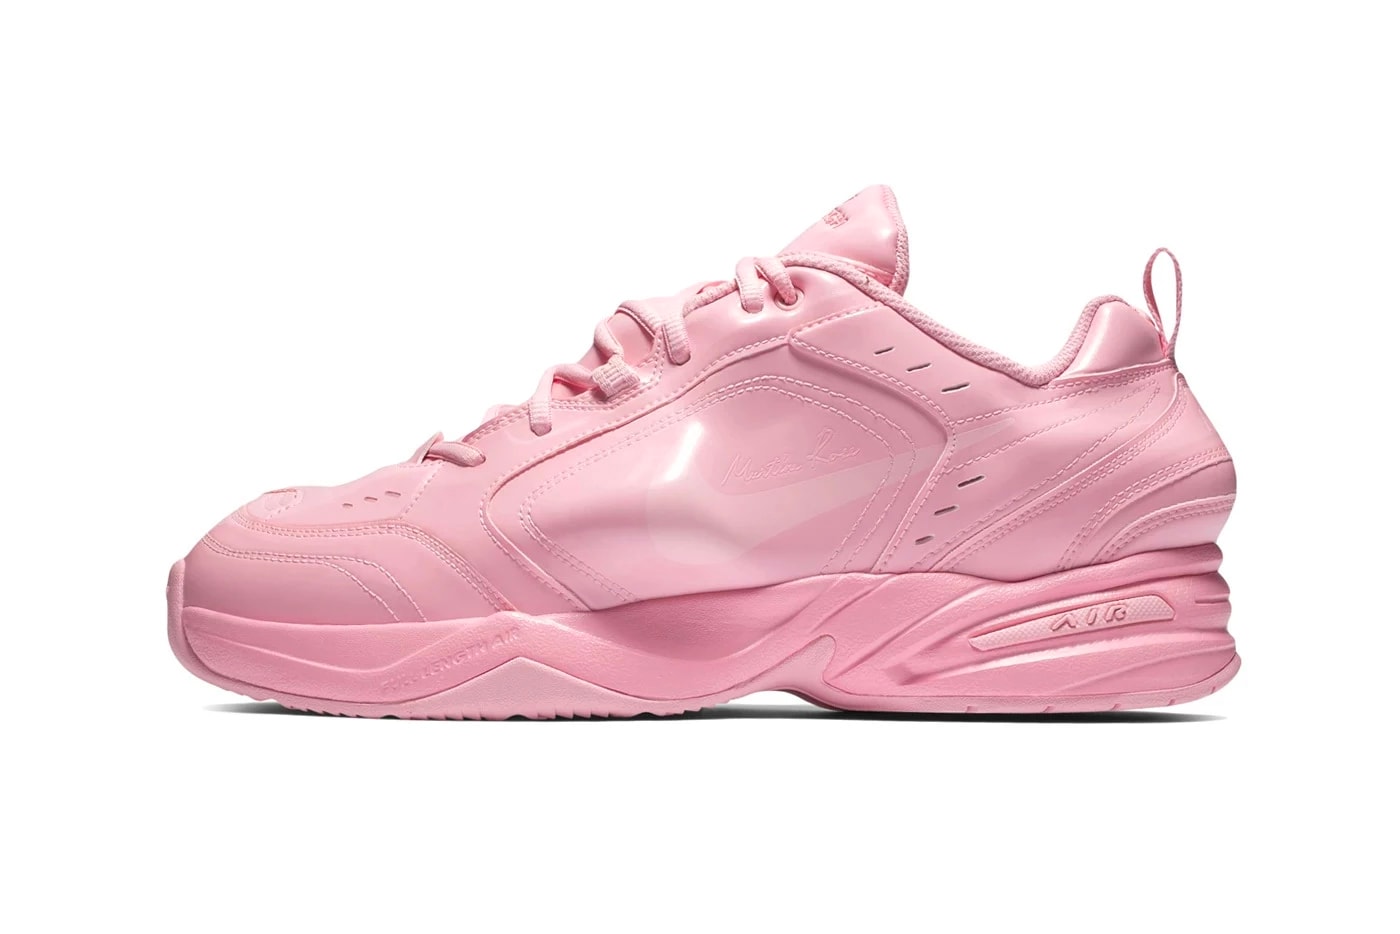 Martine Rose Nike Air Monarch IV Sneakers Sneaker Collaboration Rose Pink Millennial 2019